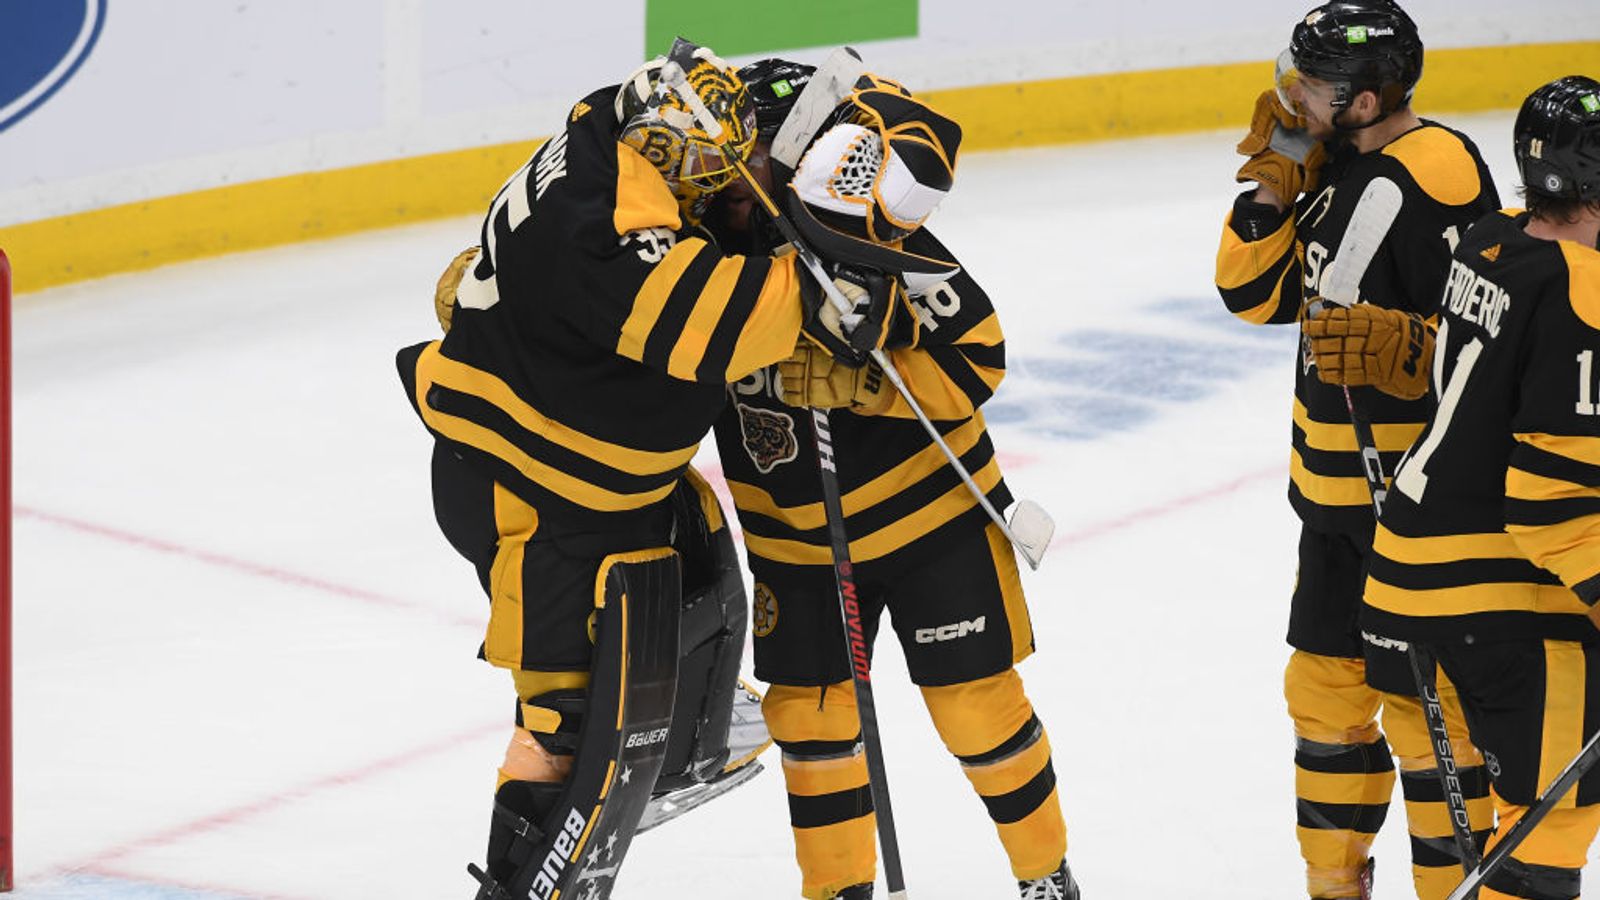 Bruins' A.J. Greer 'Couldn't Say No' To Fight With Wayne Simmonds